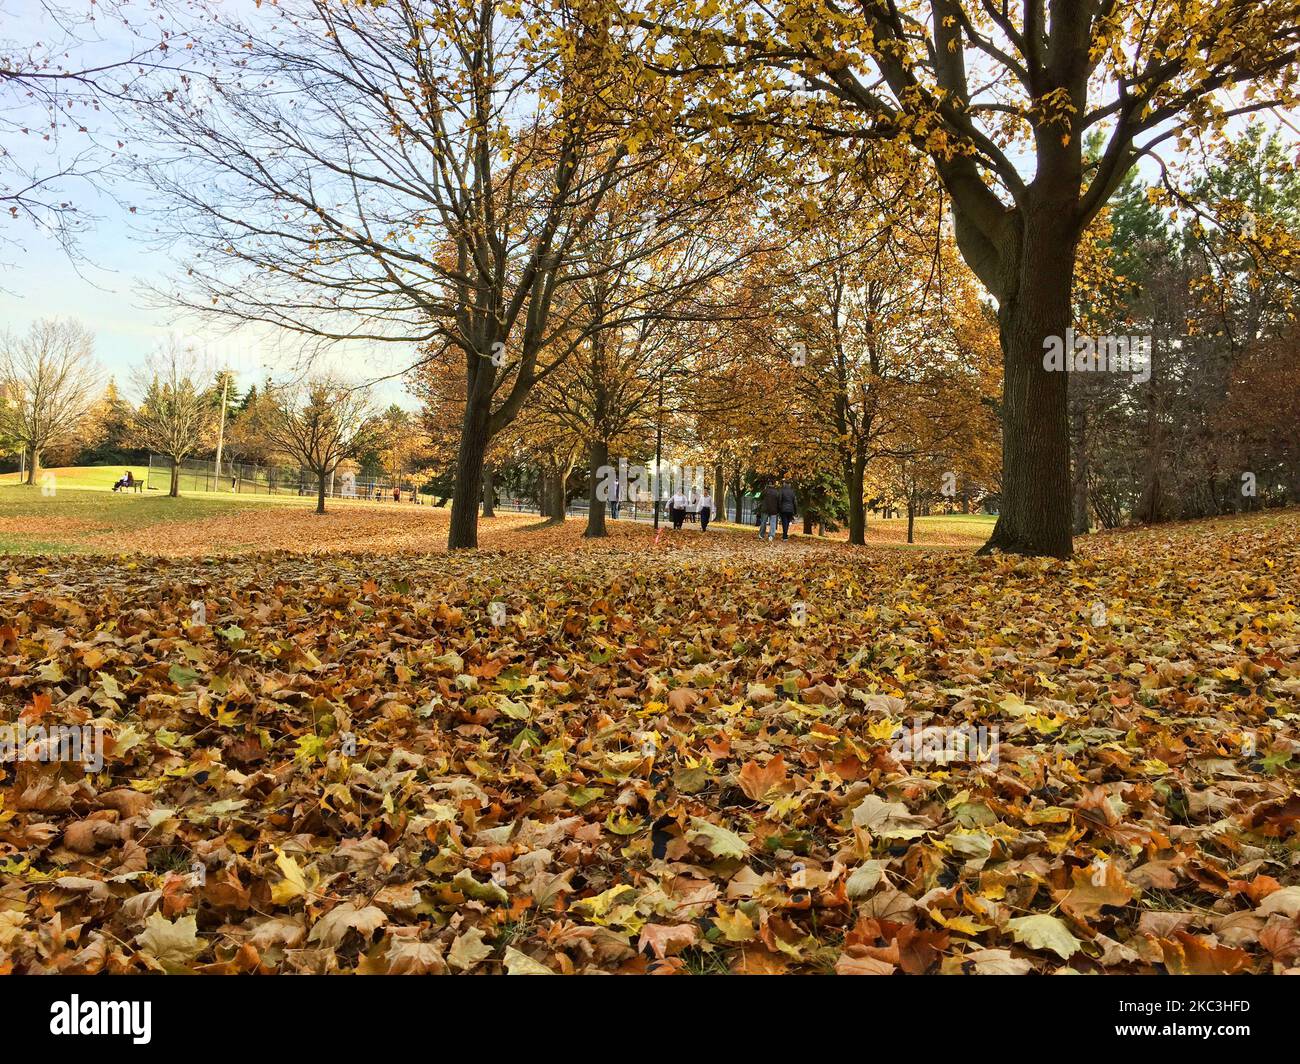 People walk amongst the Autumn leaves at a park in Toronto, Ontario, Canada, on November 07, 2020. Toronto is experiencing the warmest stretch of November weather in history with temperatures hitting a high of 20 degrees celsius. Friday's high of 20.8 °C broke the record of 20.5 °C set in 2015 and Sunday temperatures in Toronto are expected to reach 20°C. This trend will continue into the early days of next week as well. (Photo by Creative Touch Imaging Ltd./NurPhoto) Stock Photo